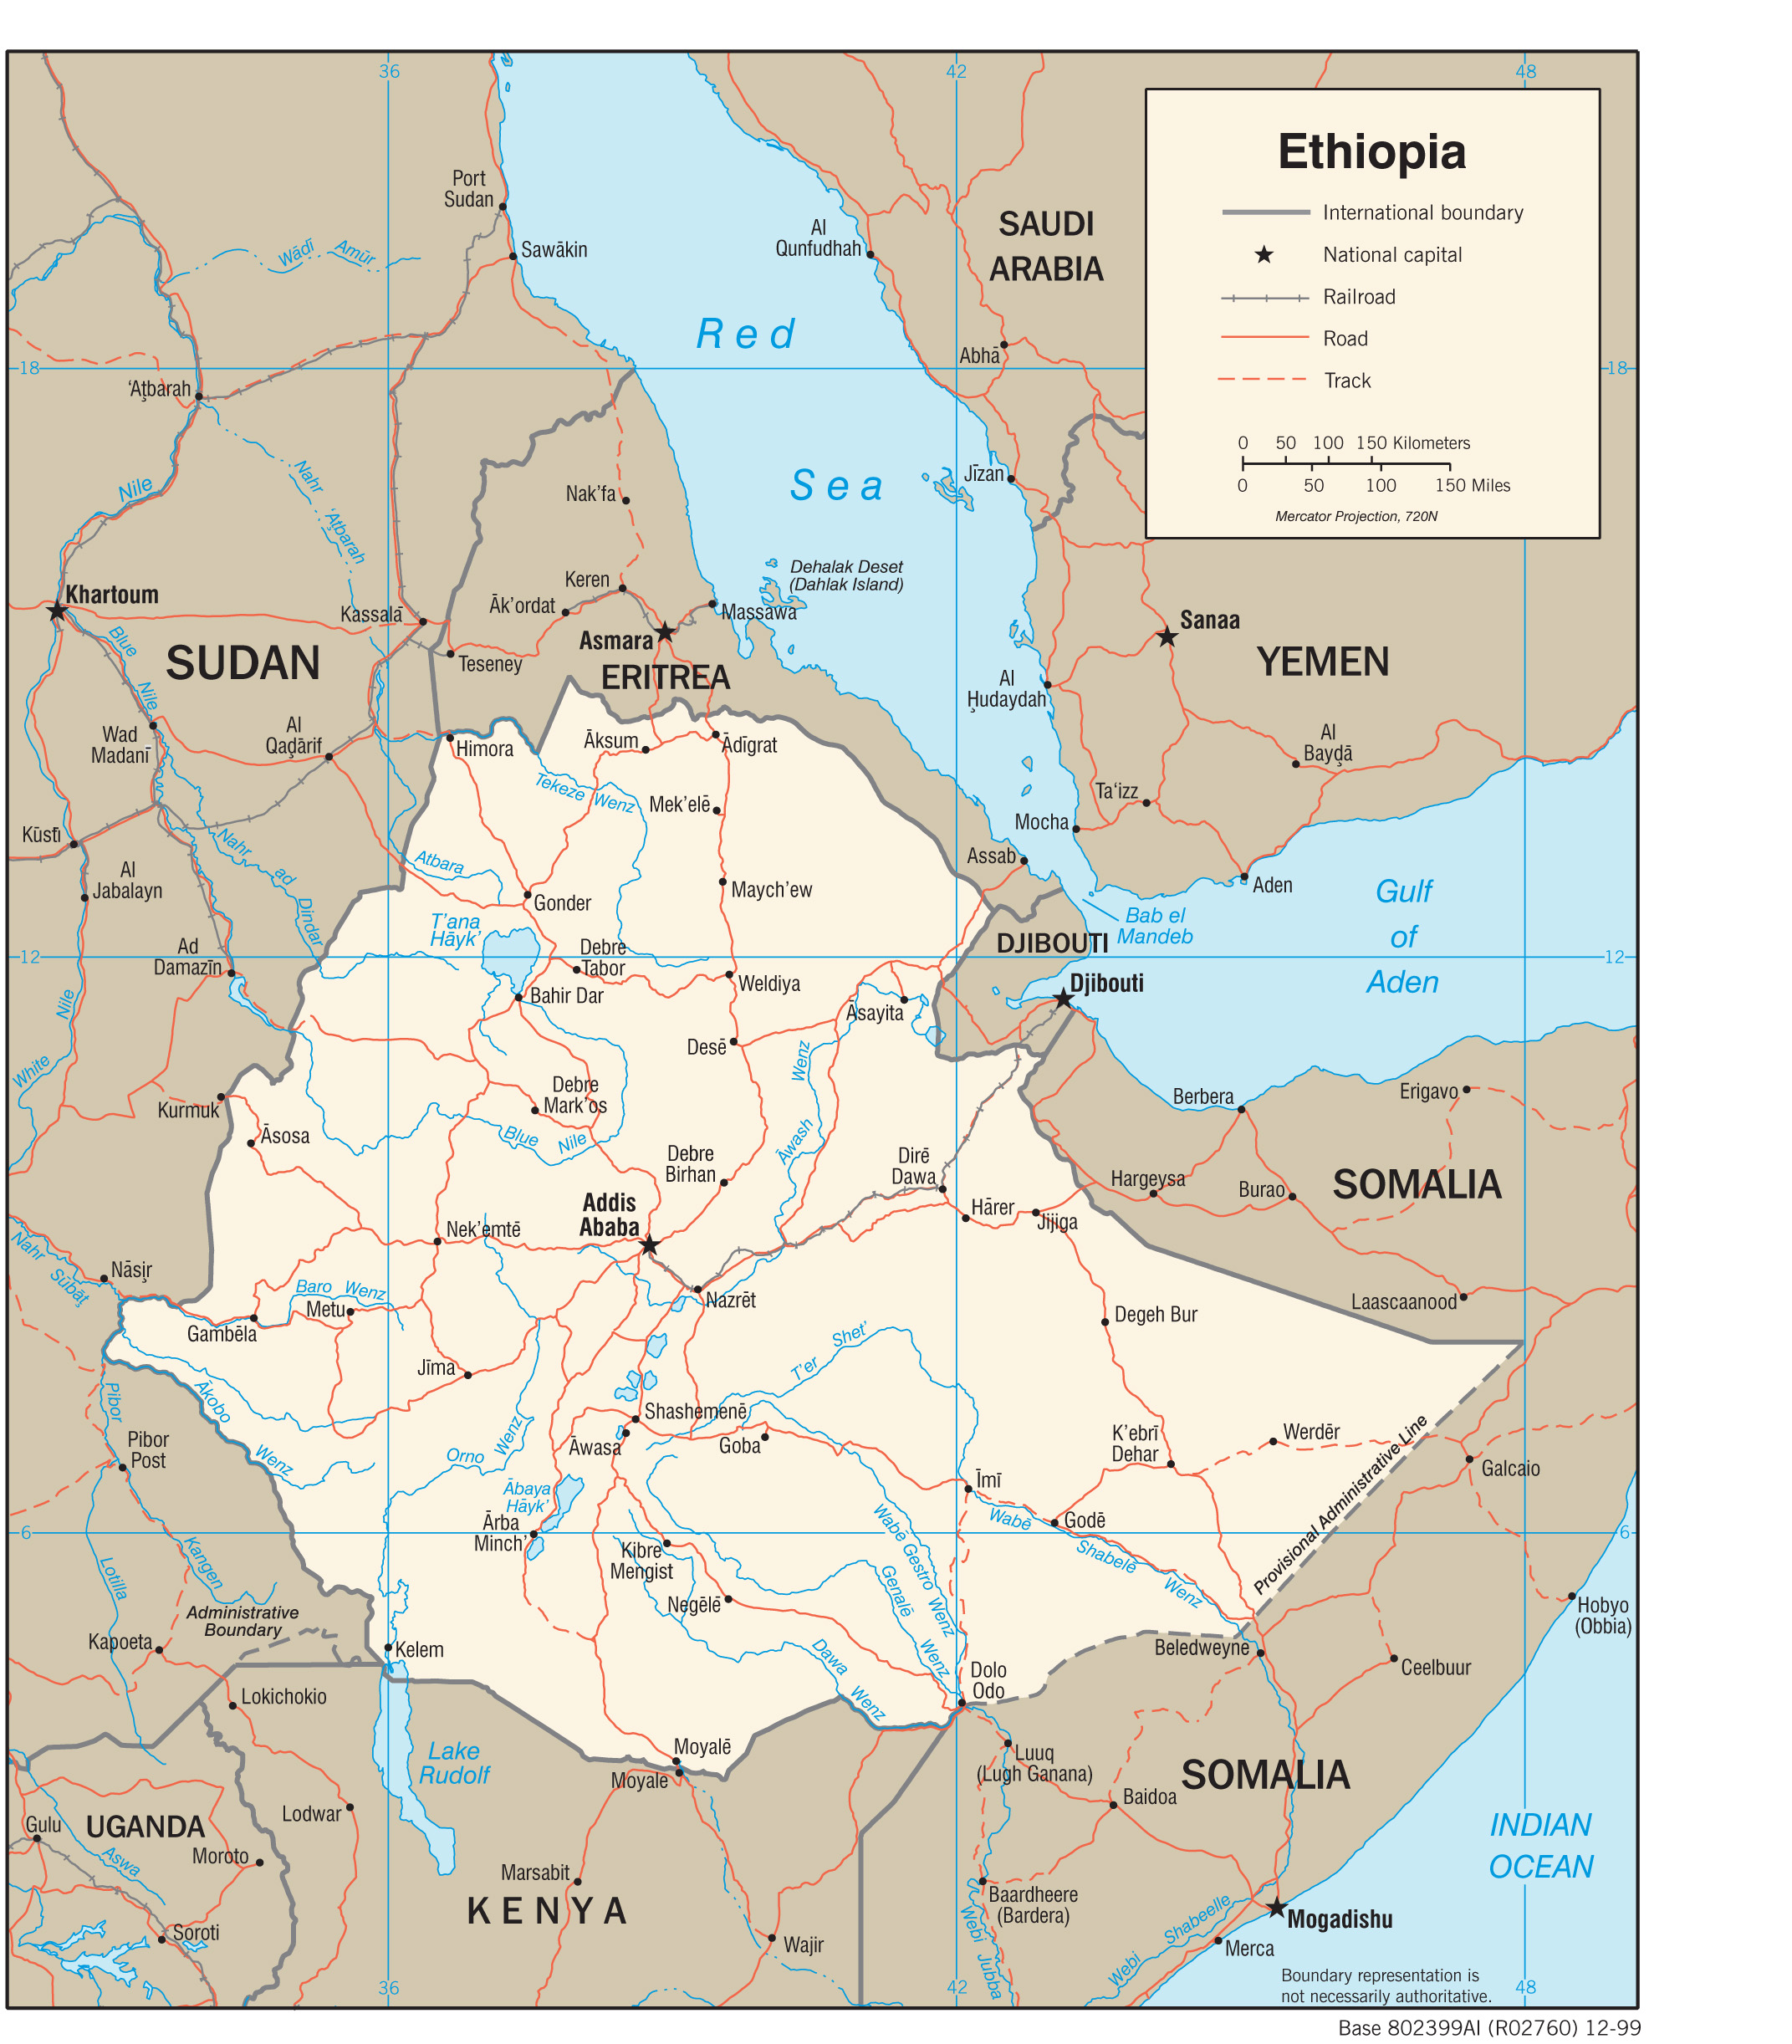 Ethiopia Maps - Perry-Castañeda Map Collection - UT Library Online